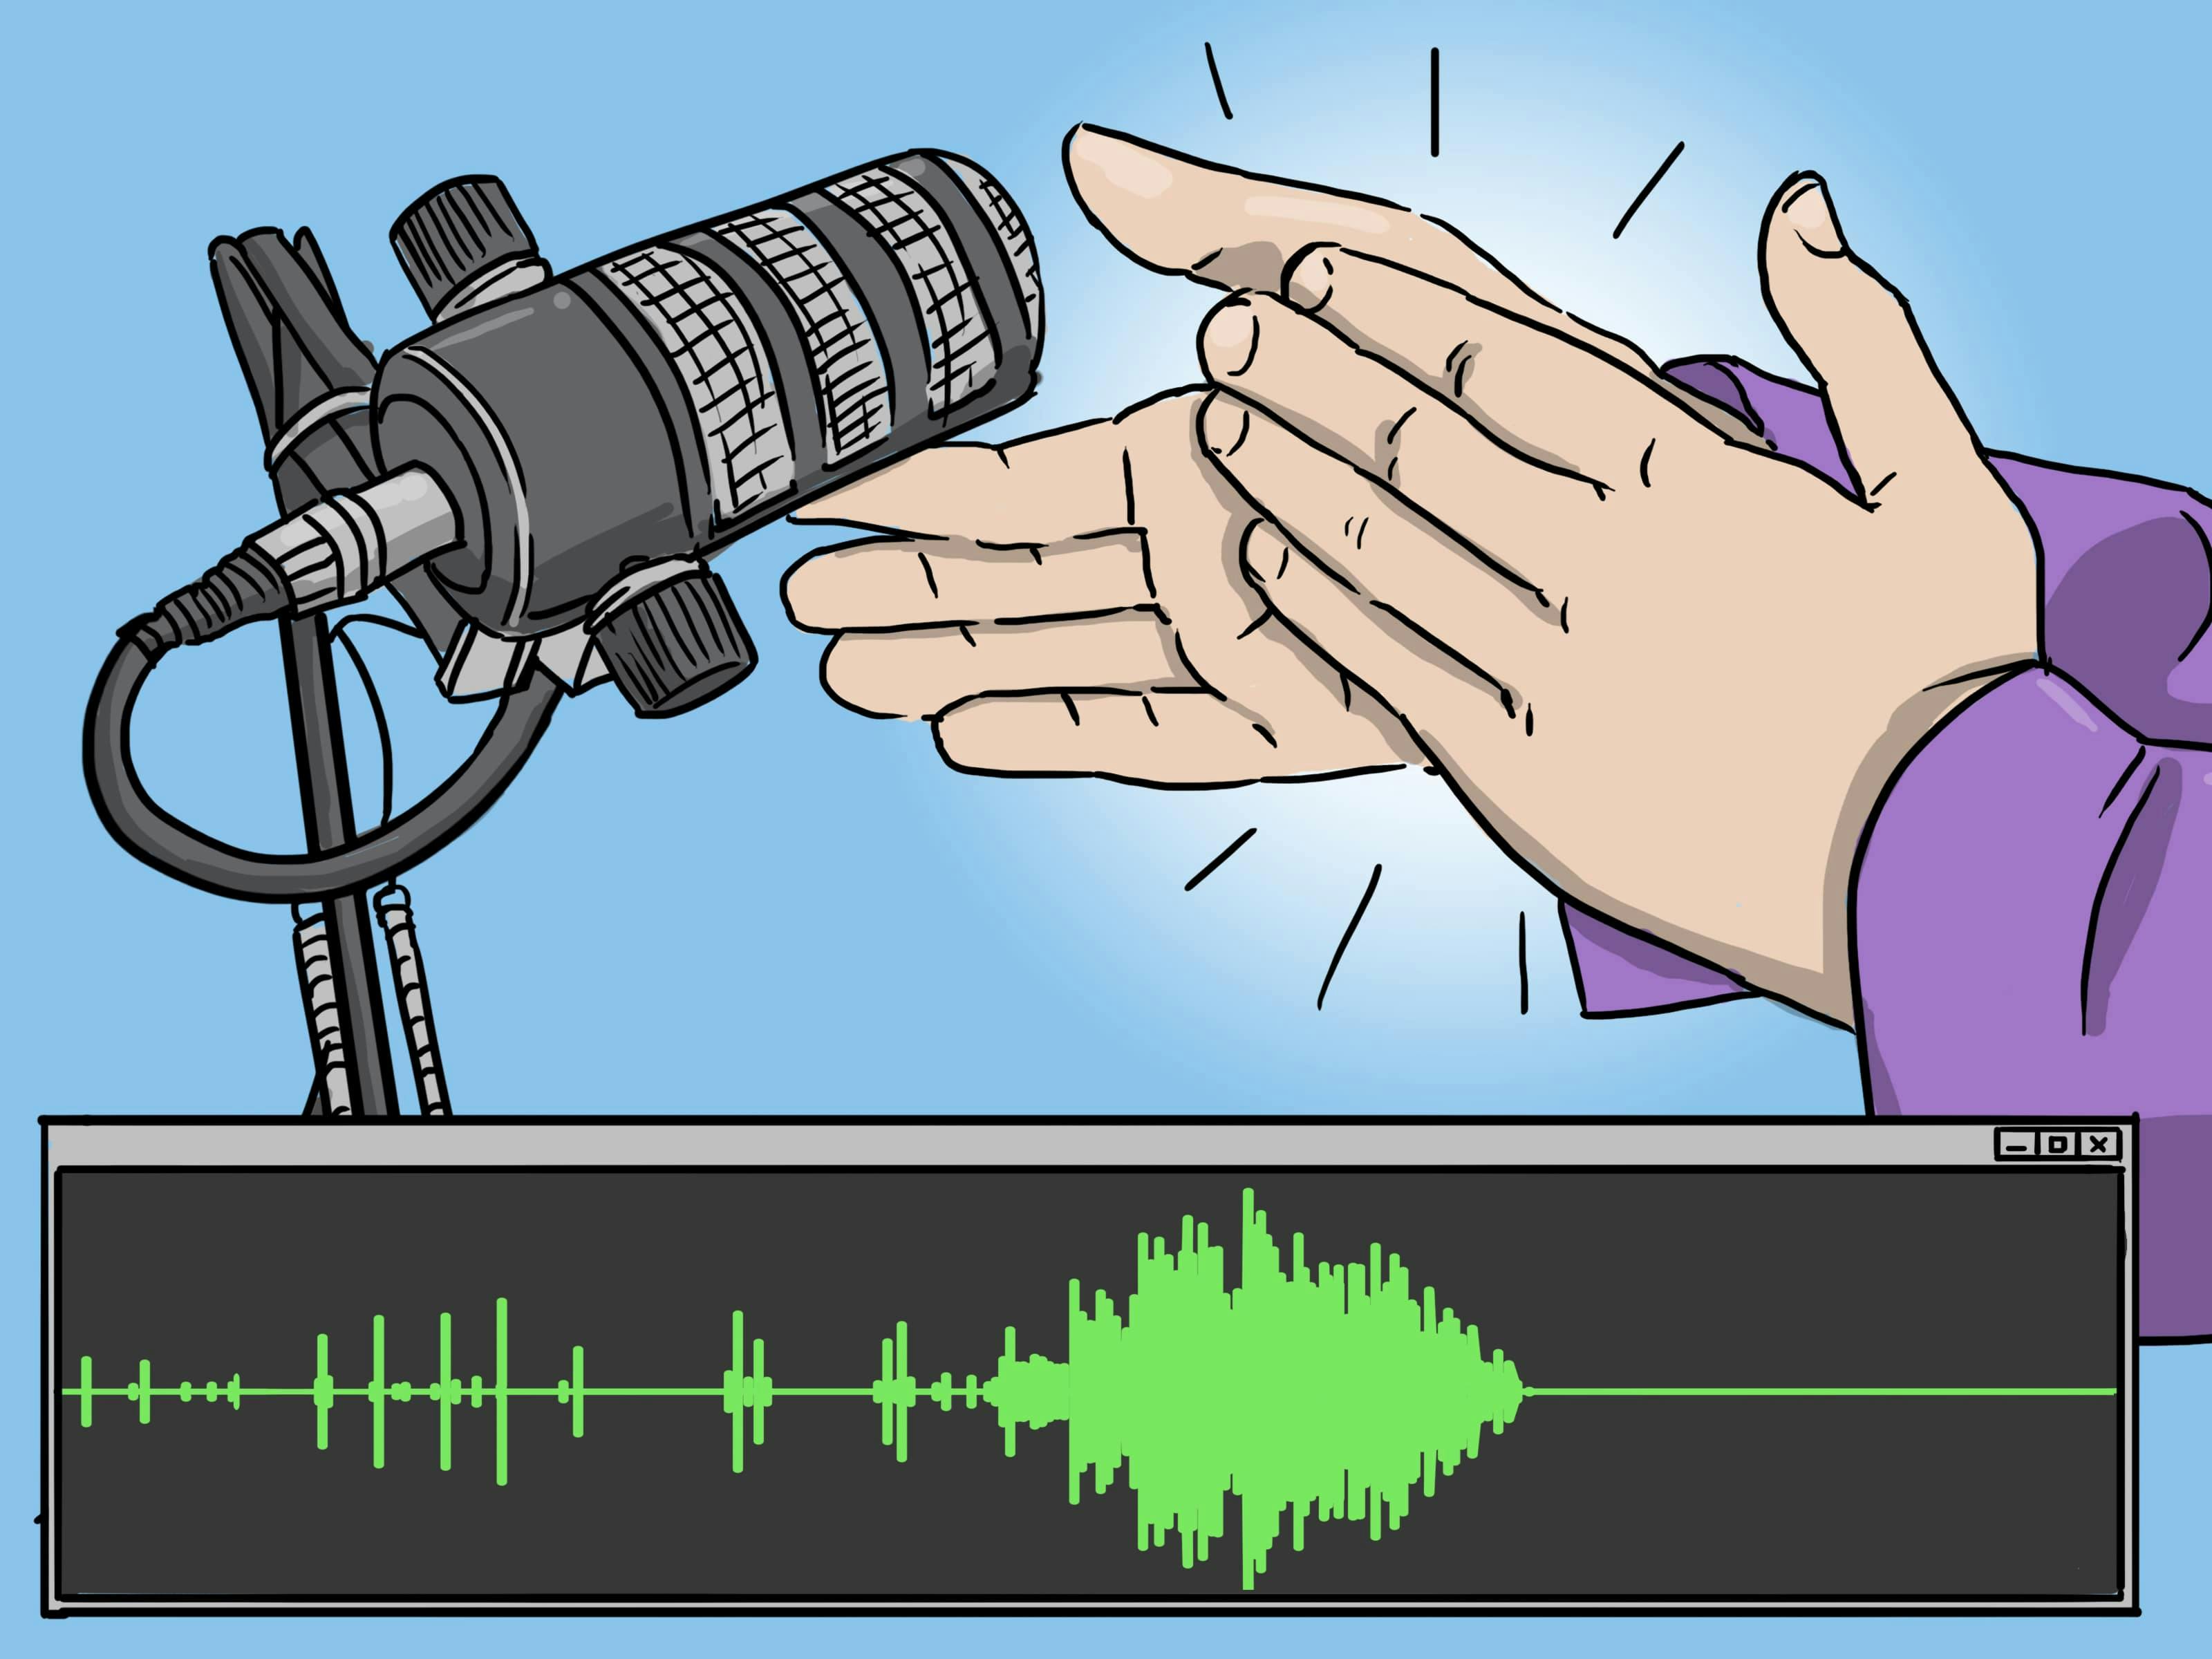 Clap your hands to easily spot audio mistake areas while recording.